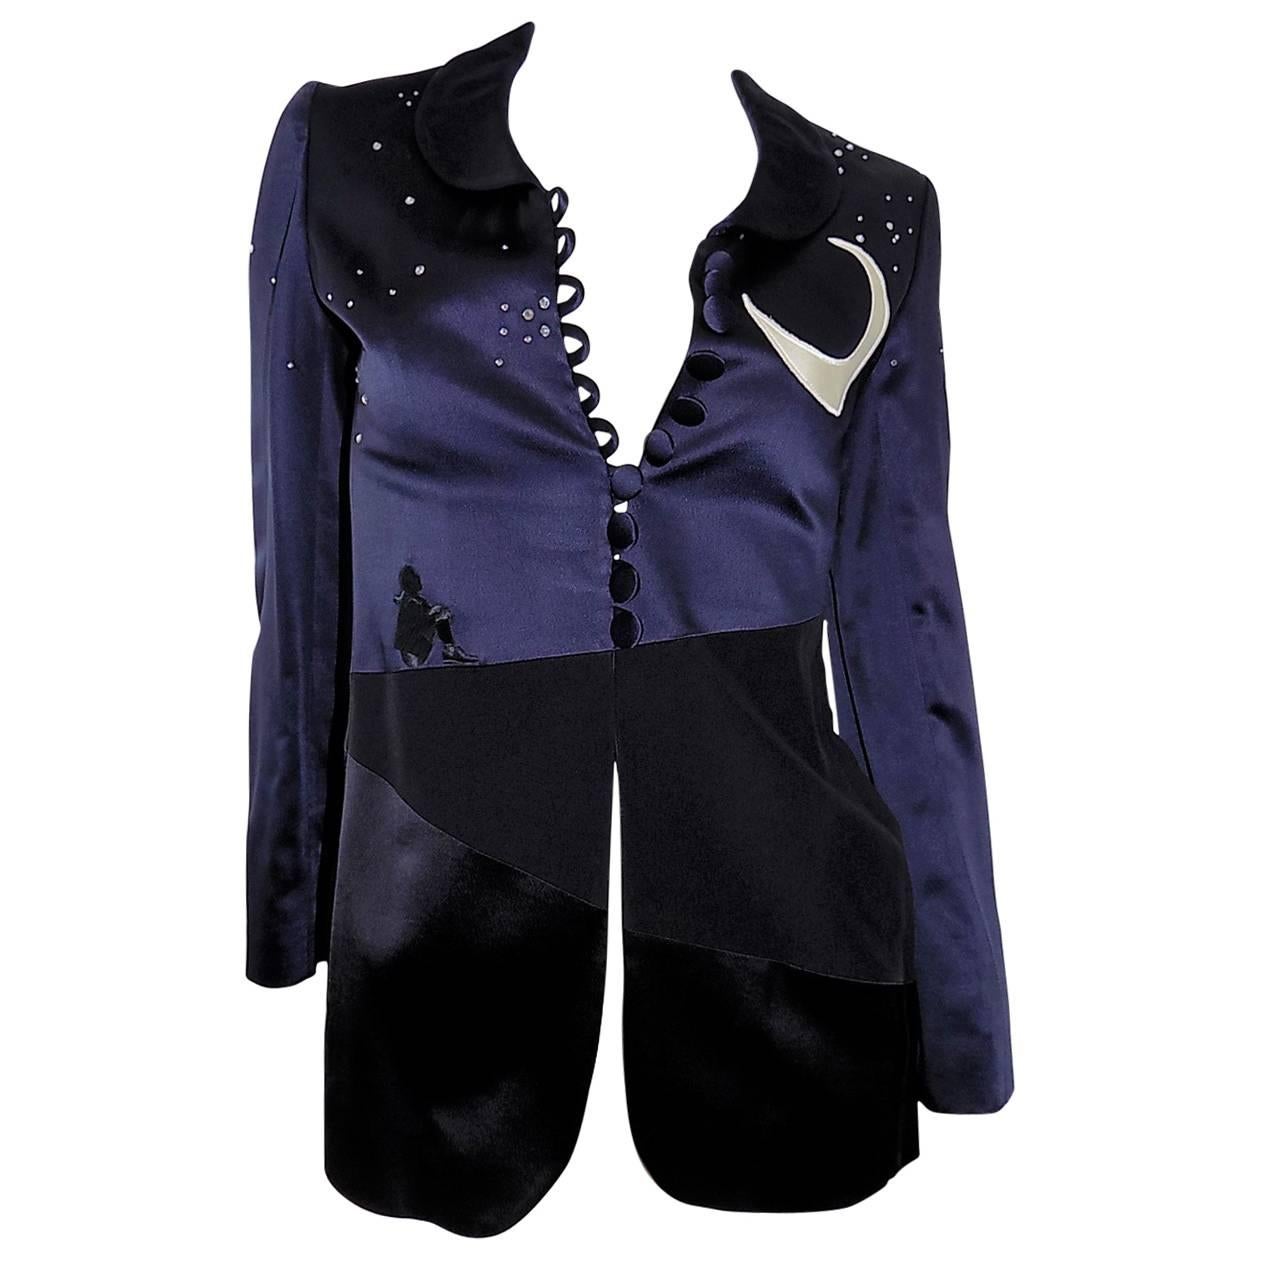 Moschino Cheap and Chic Midnight Moon Vintage Jacket